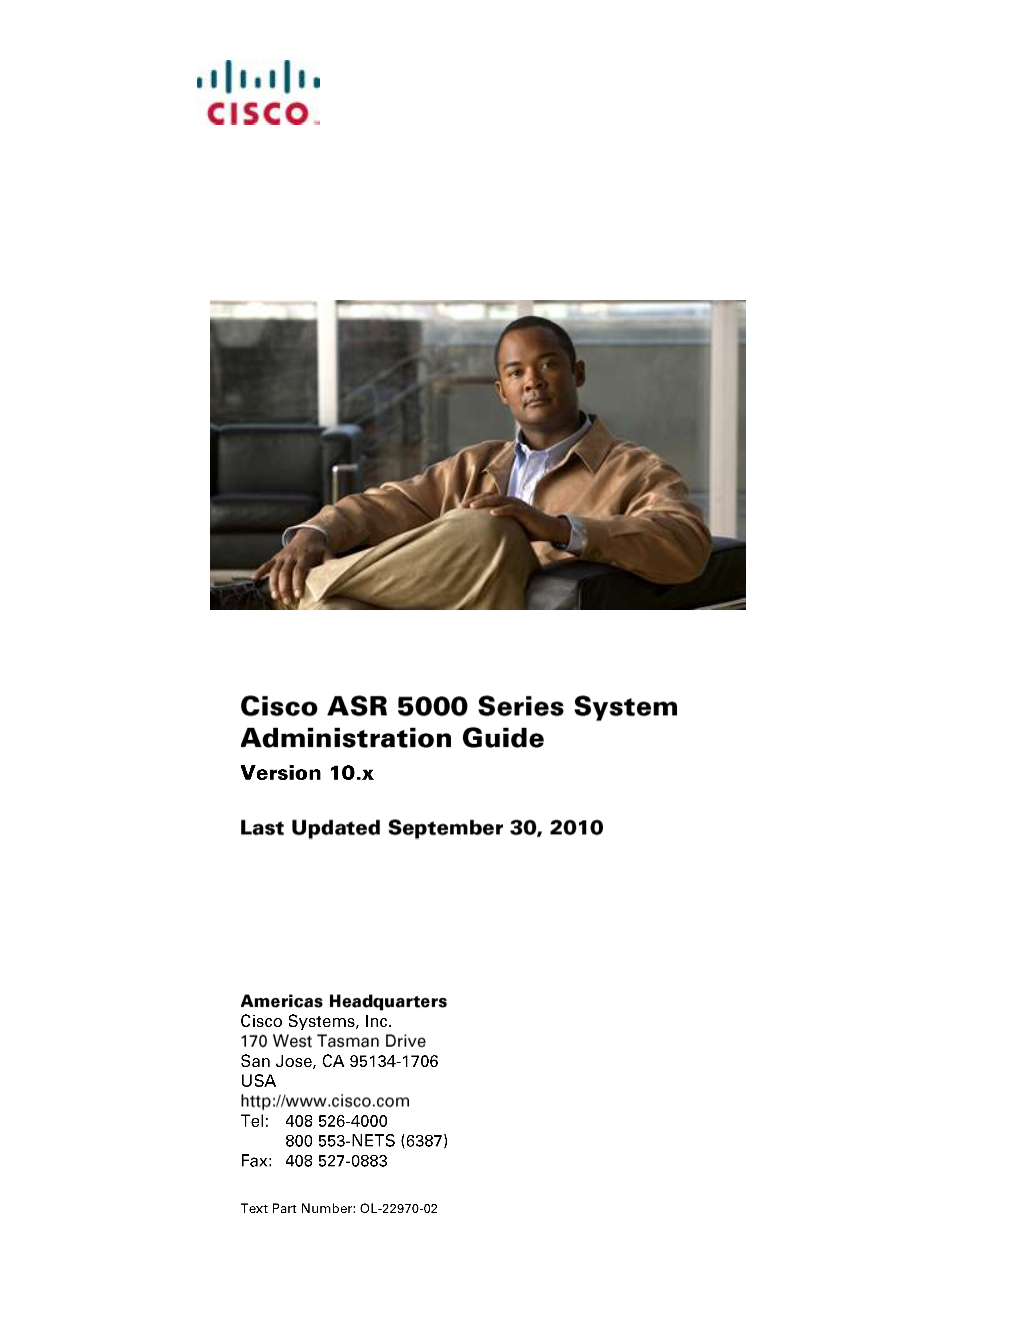 Cisco ASR 5000 Series System Administration Guide